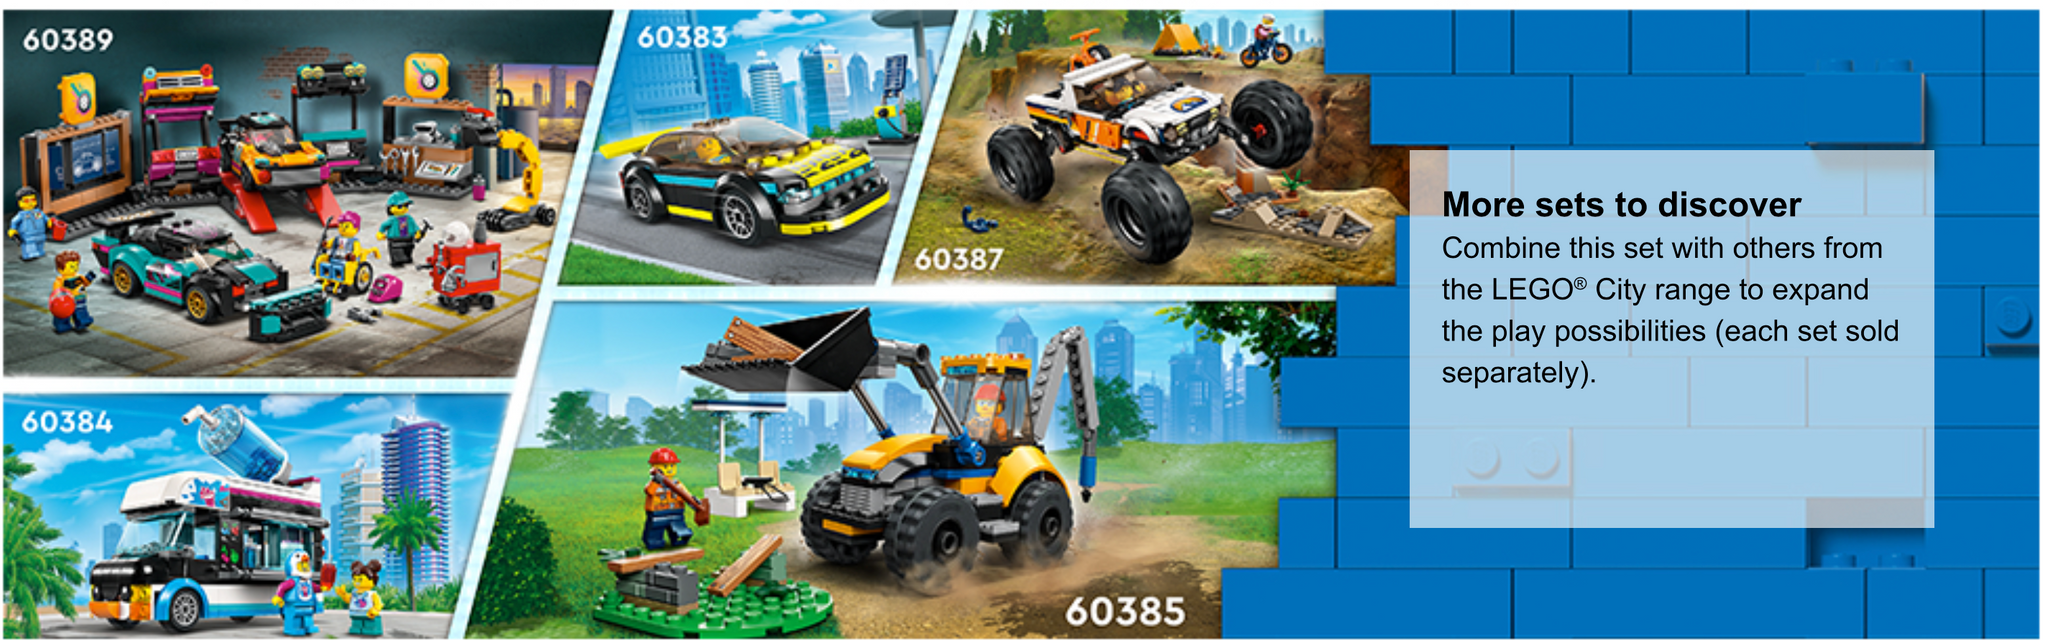 LEGO City Construction Digger 60385 Building Toy - Excavator Model  Featuring Tools and Minifigures, Vehicle Building Set for Fun Creative  Play